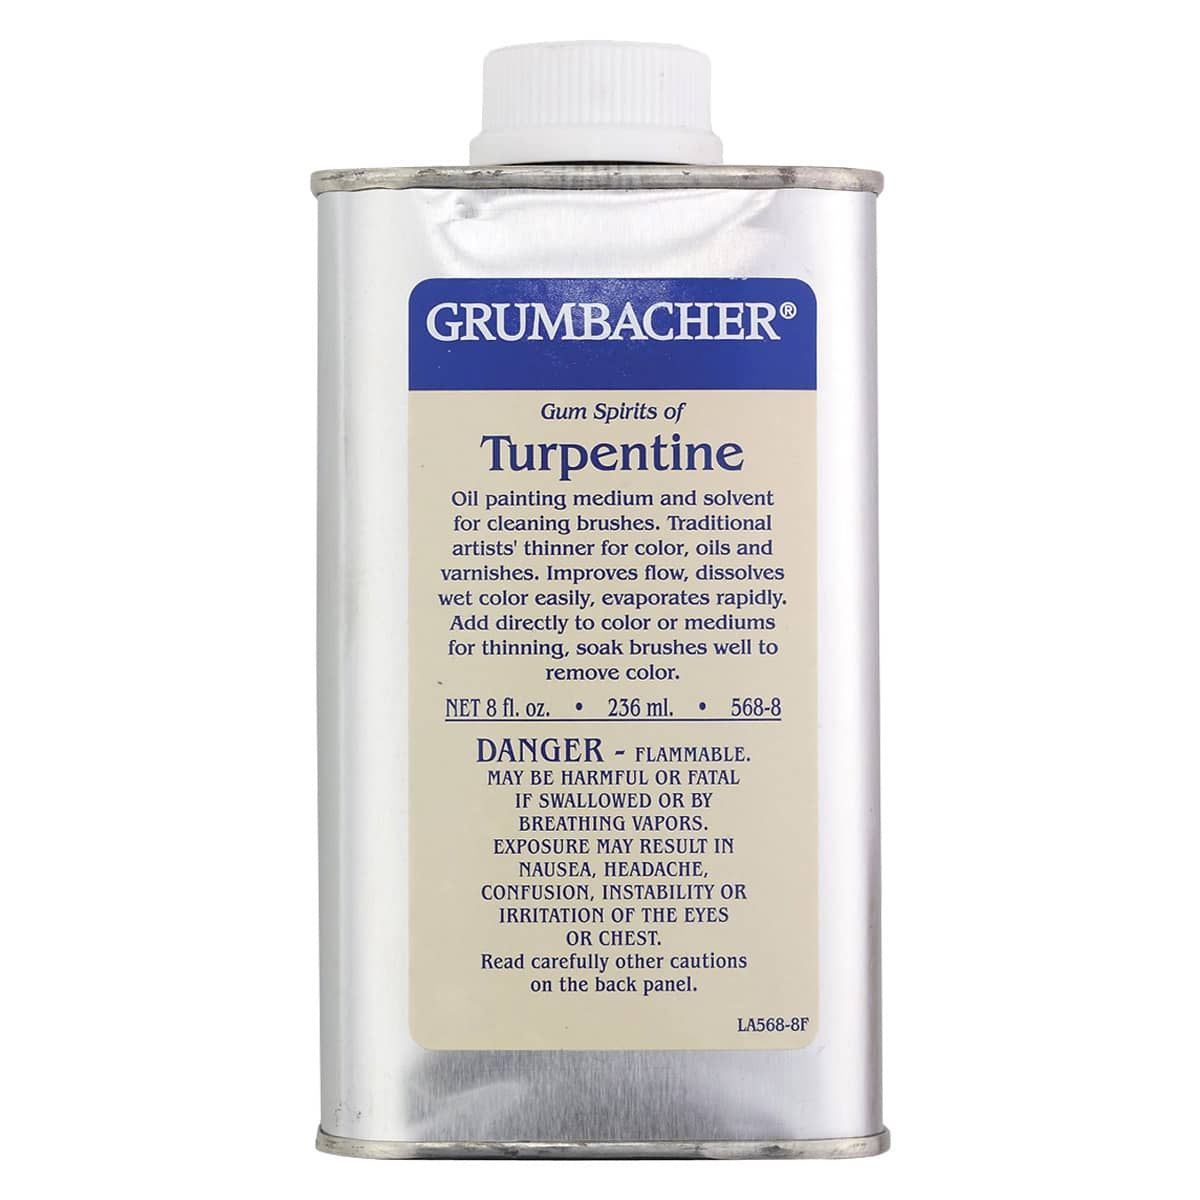 Grumbacher Pre-Tested Turpentine, 8 oz Bottle